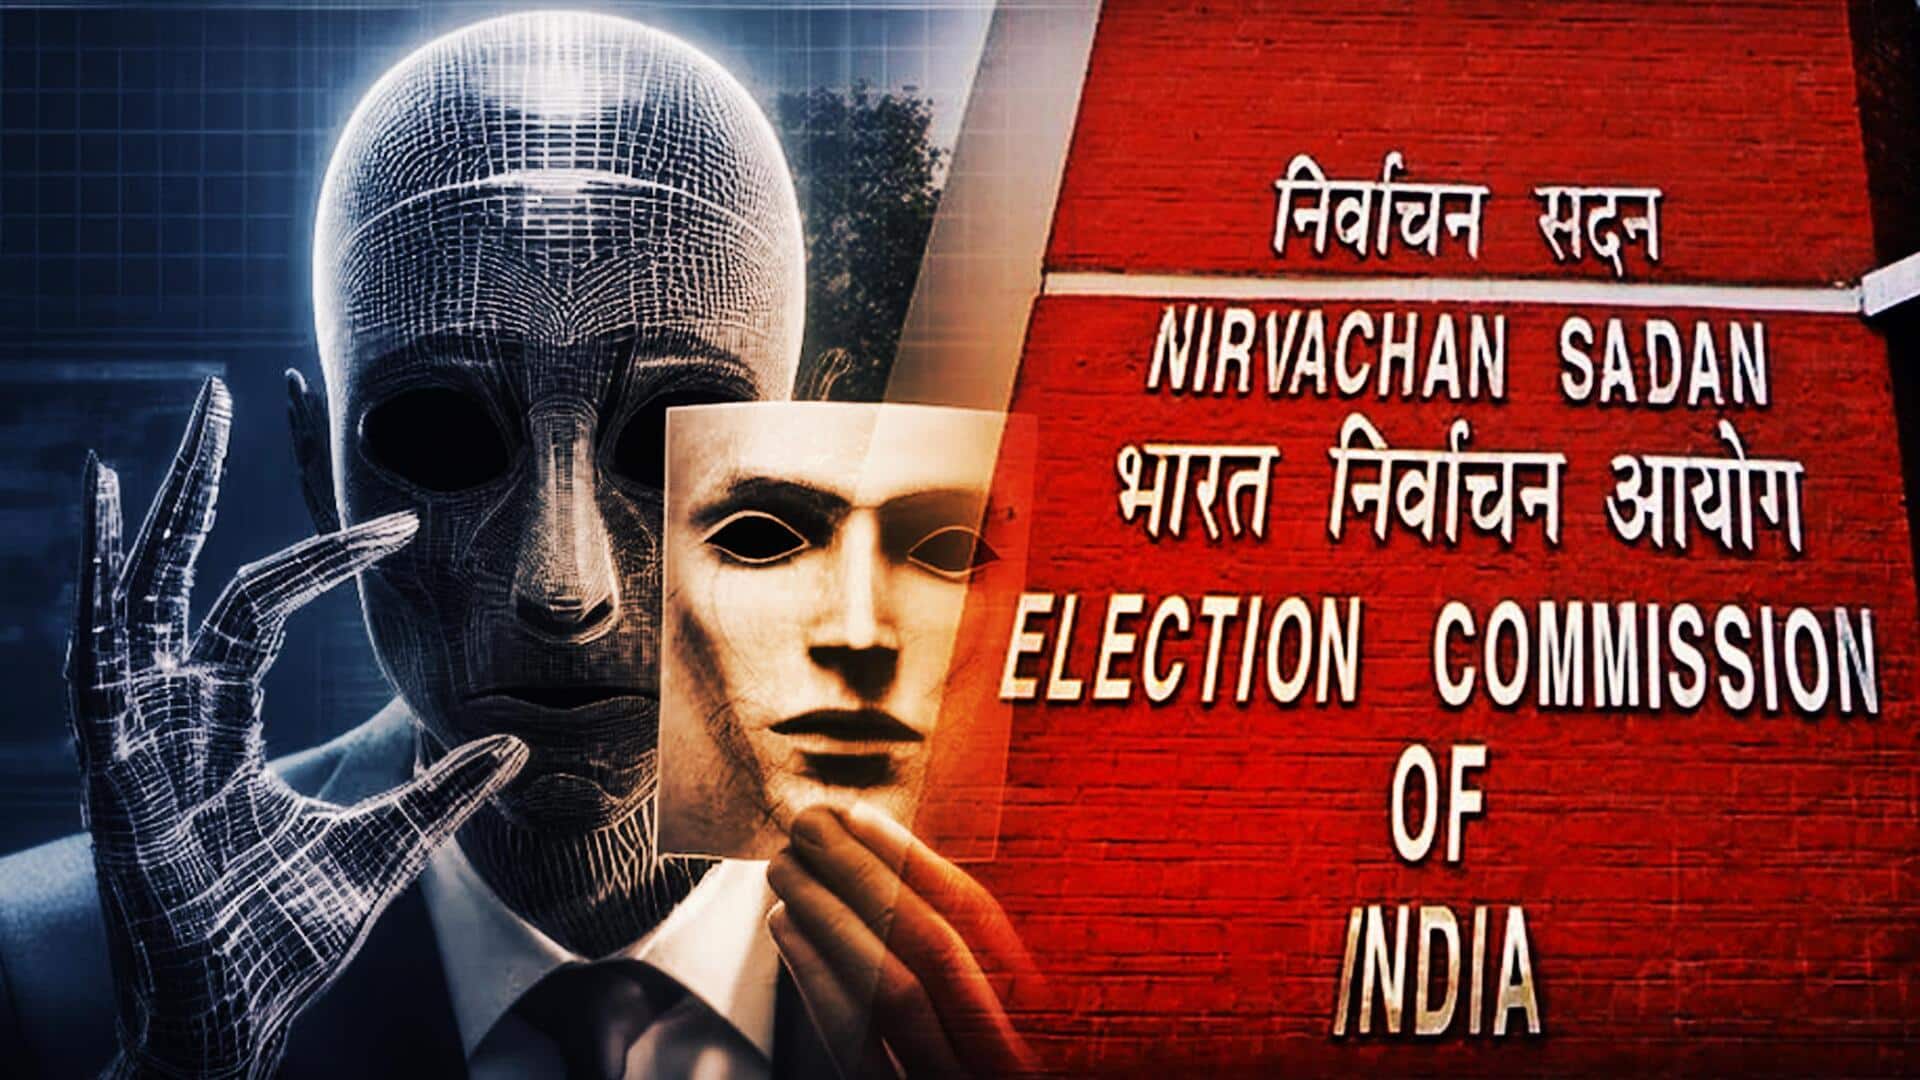 Remove deepfakes within 3 hours of notification: ECI to parties